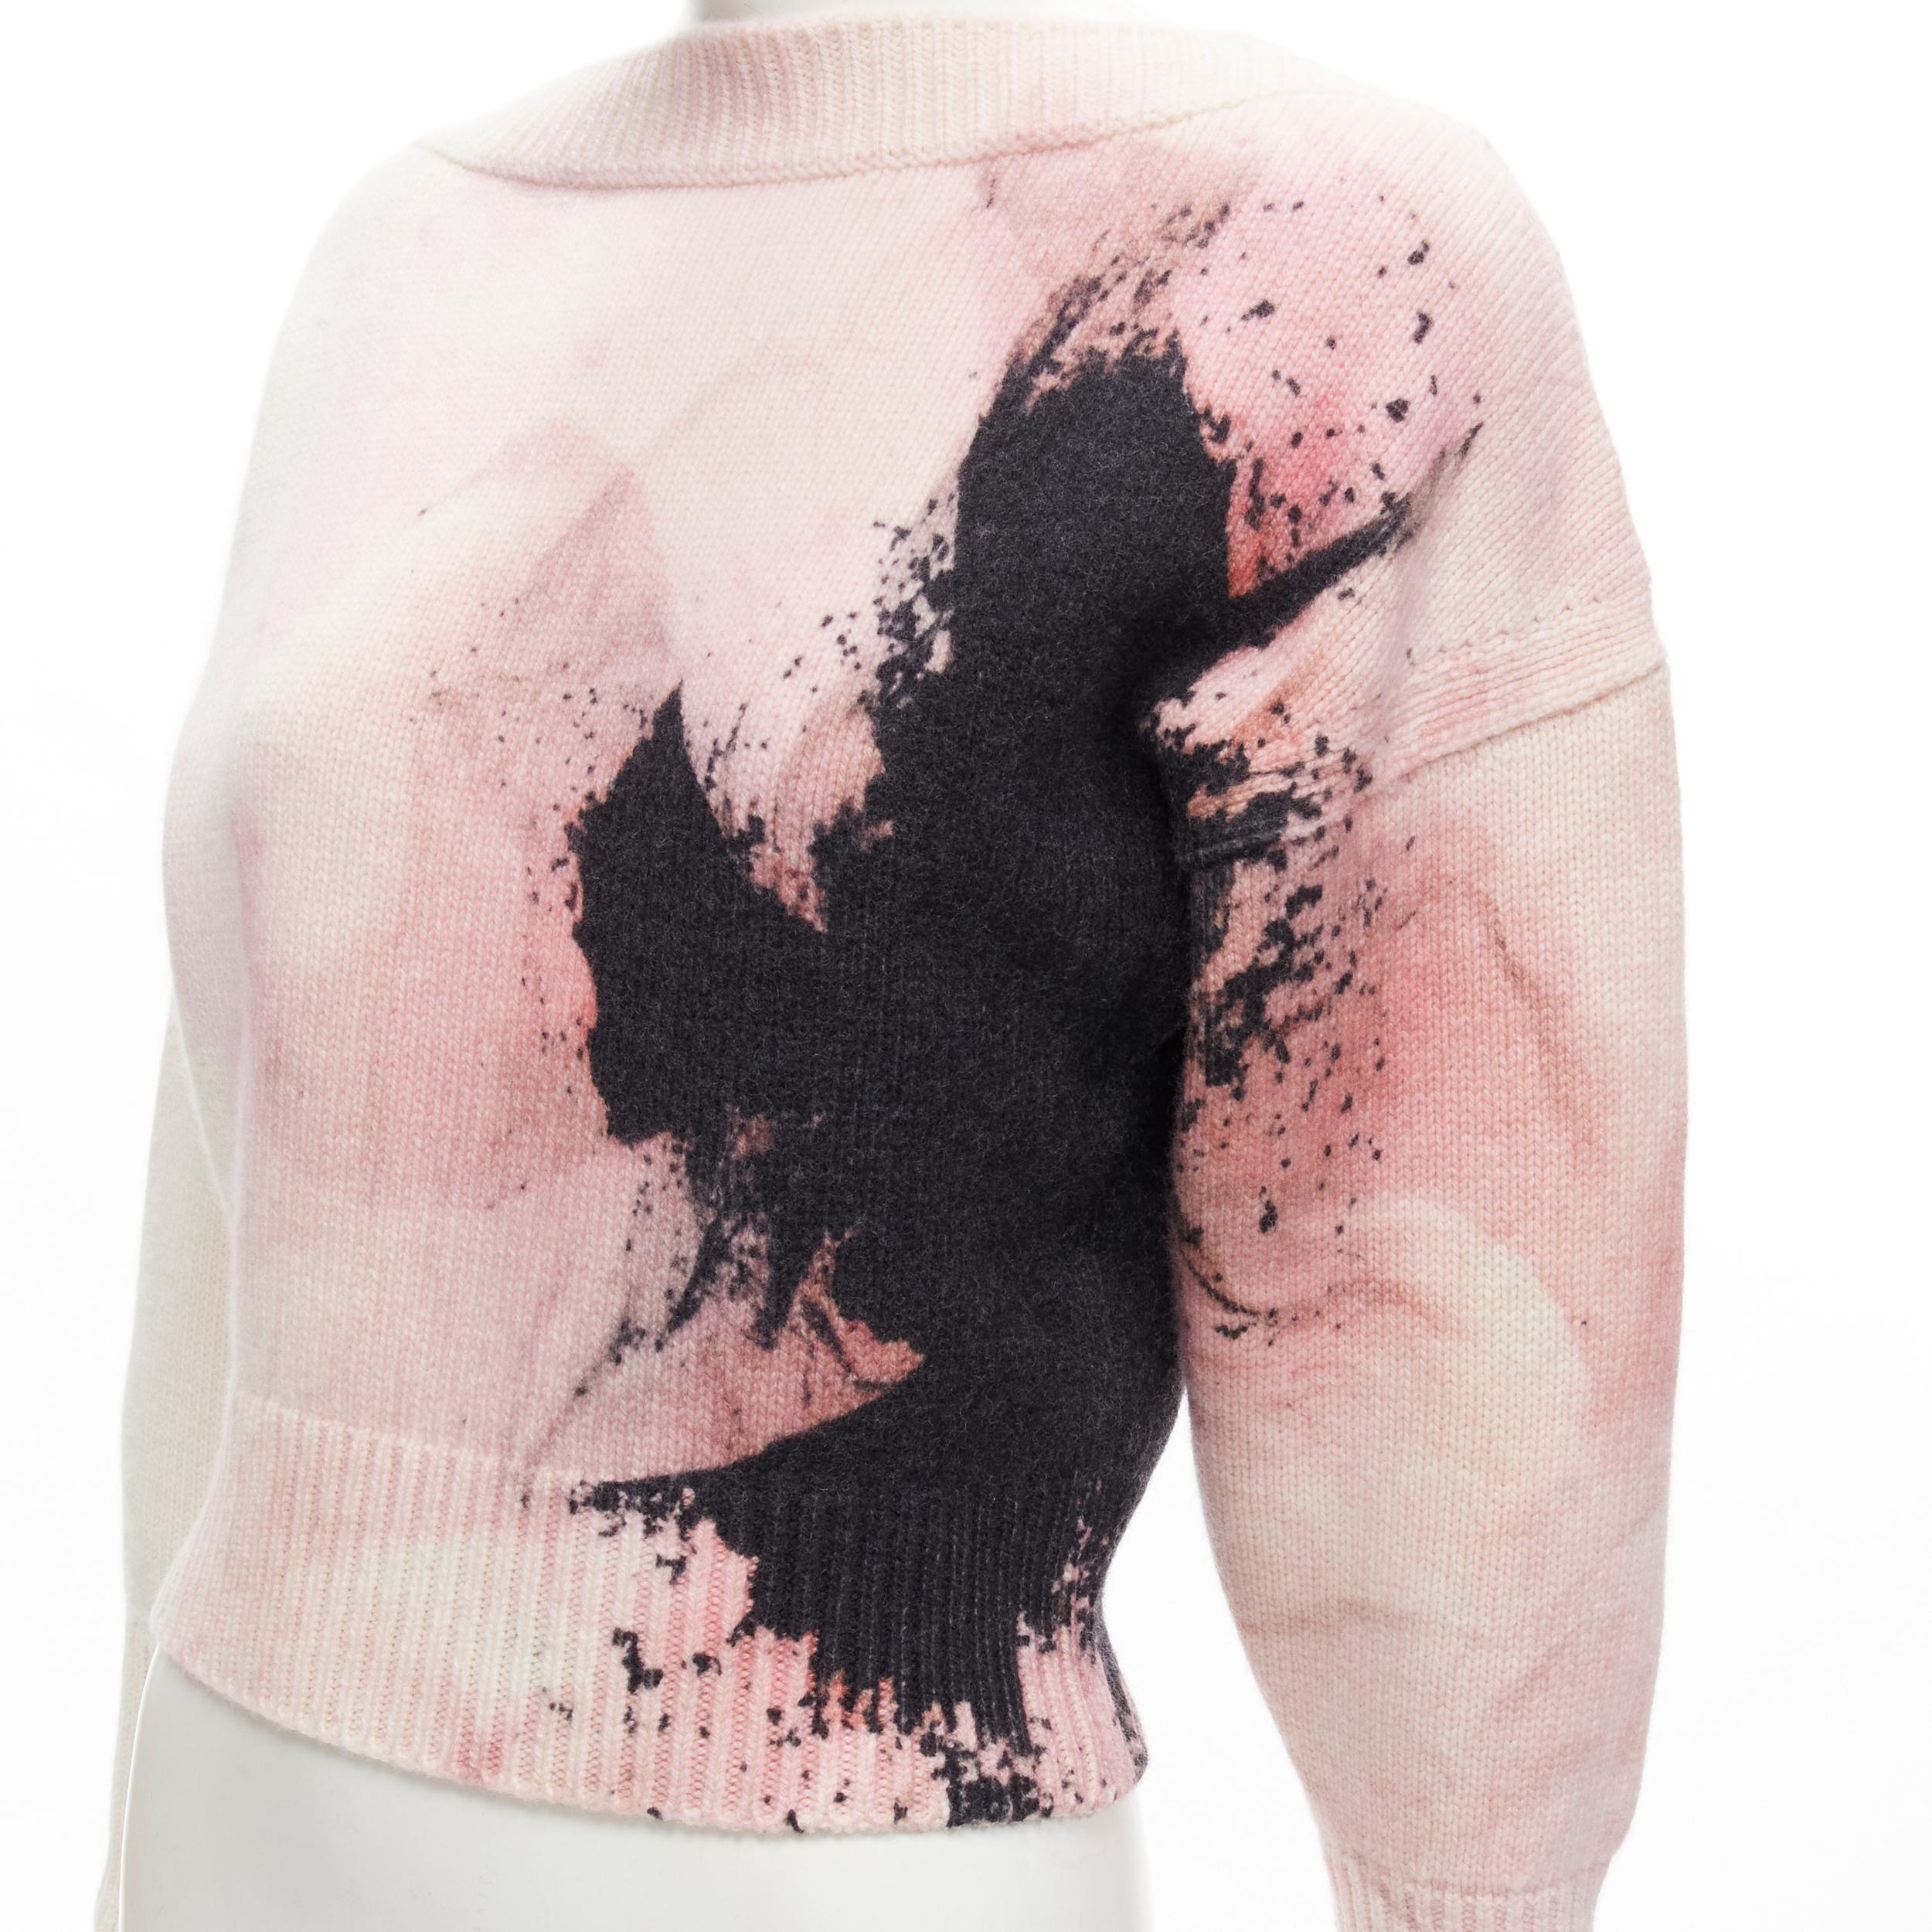 ALEXANDER MCQUEEN 2021 Anemone wool cashmere floral print cropped sweater XXS
Brand: Alexander McQueen
Collection: 2021 Anemone 
Material: Wool
Color: Ecru
Pattern: Floral
Extra Detail: Abstract blush and pink Anemone print.
Made in: